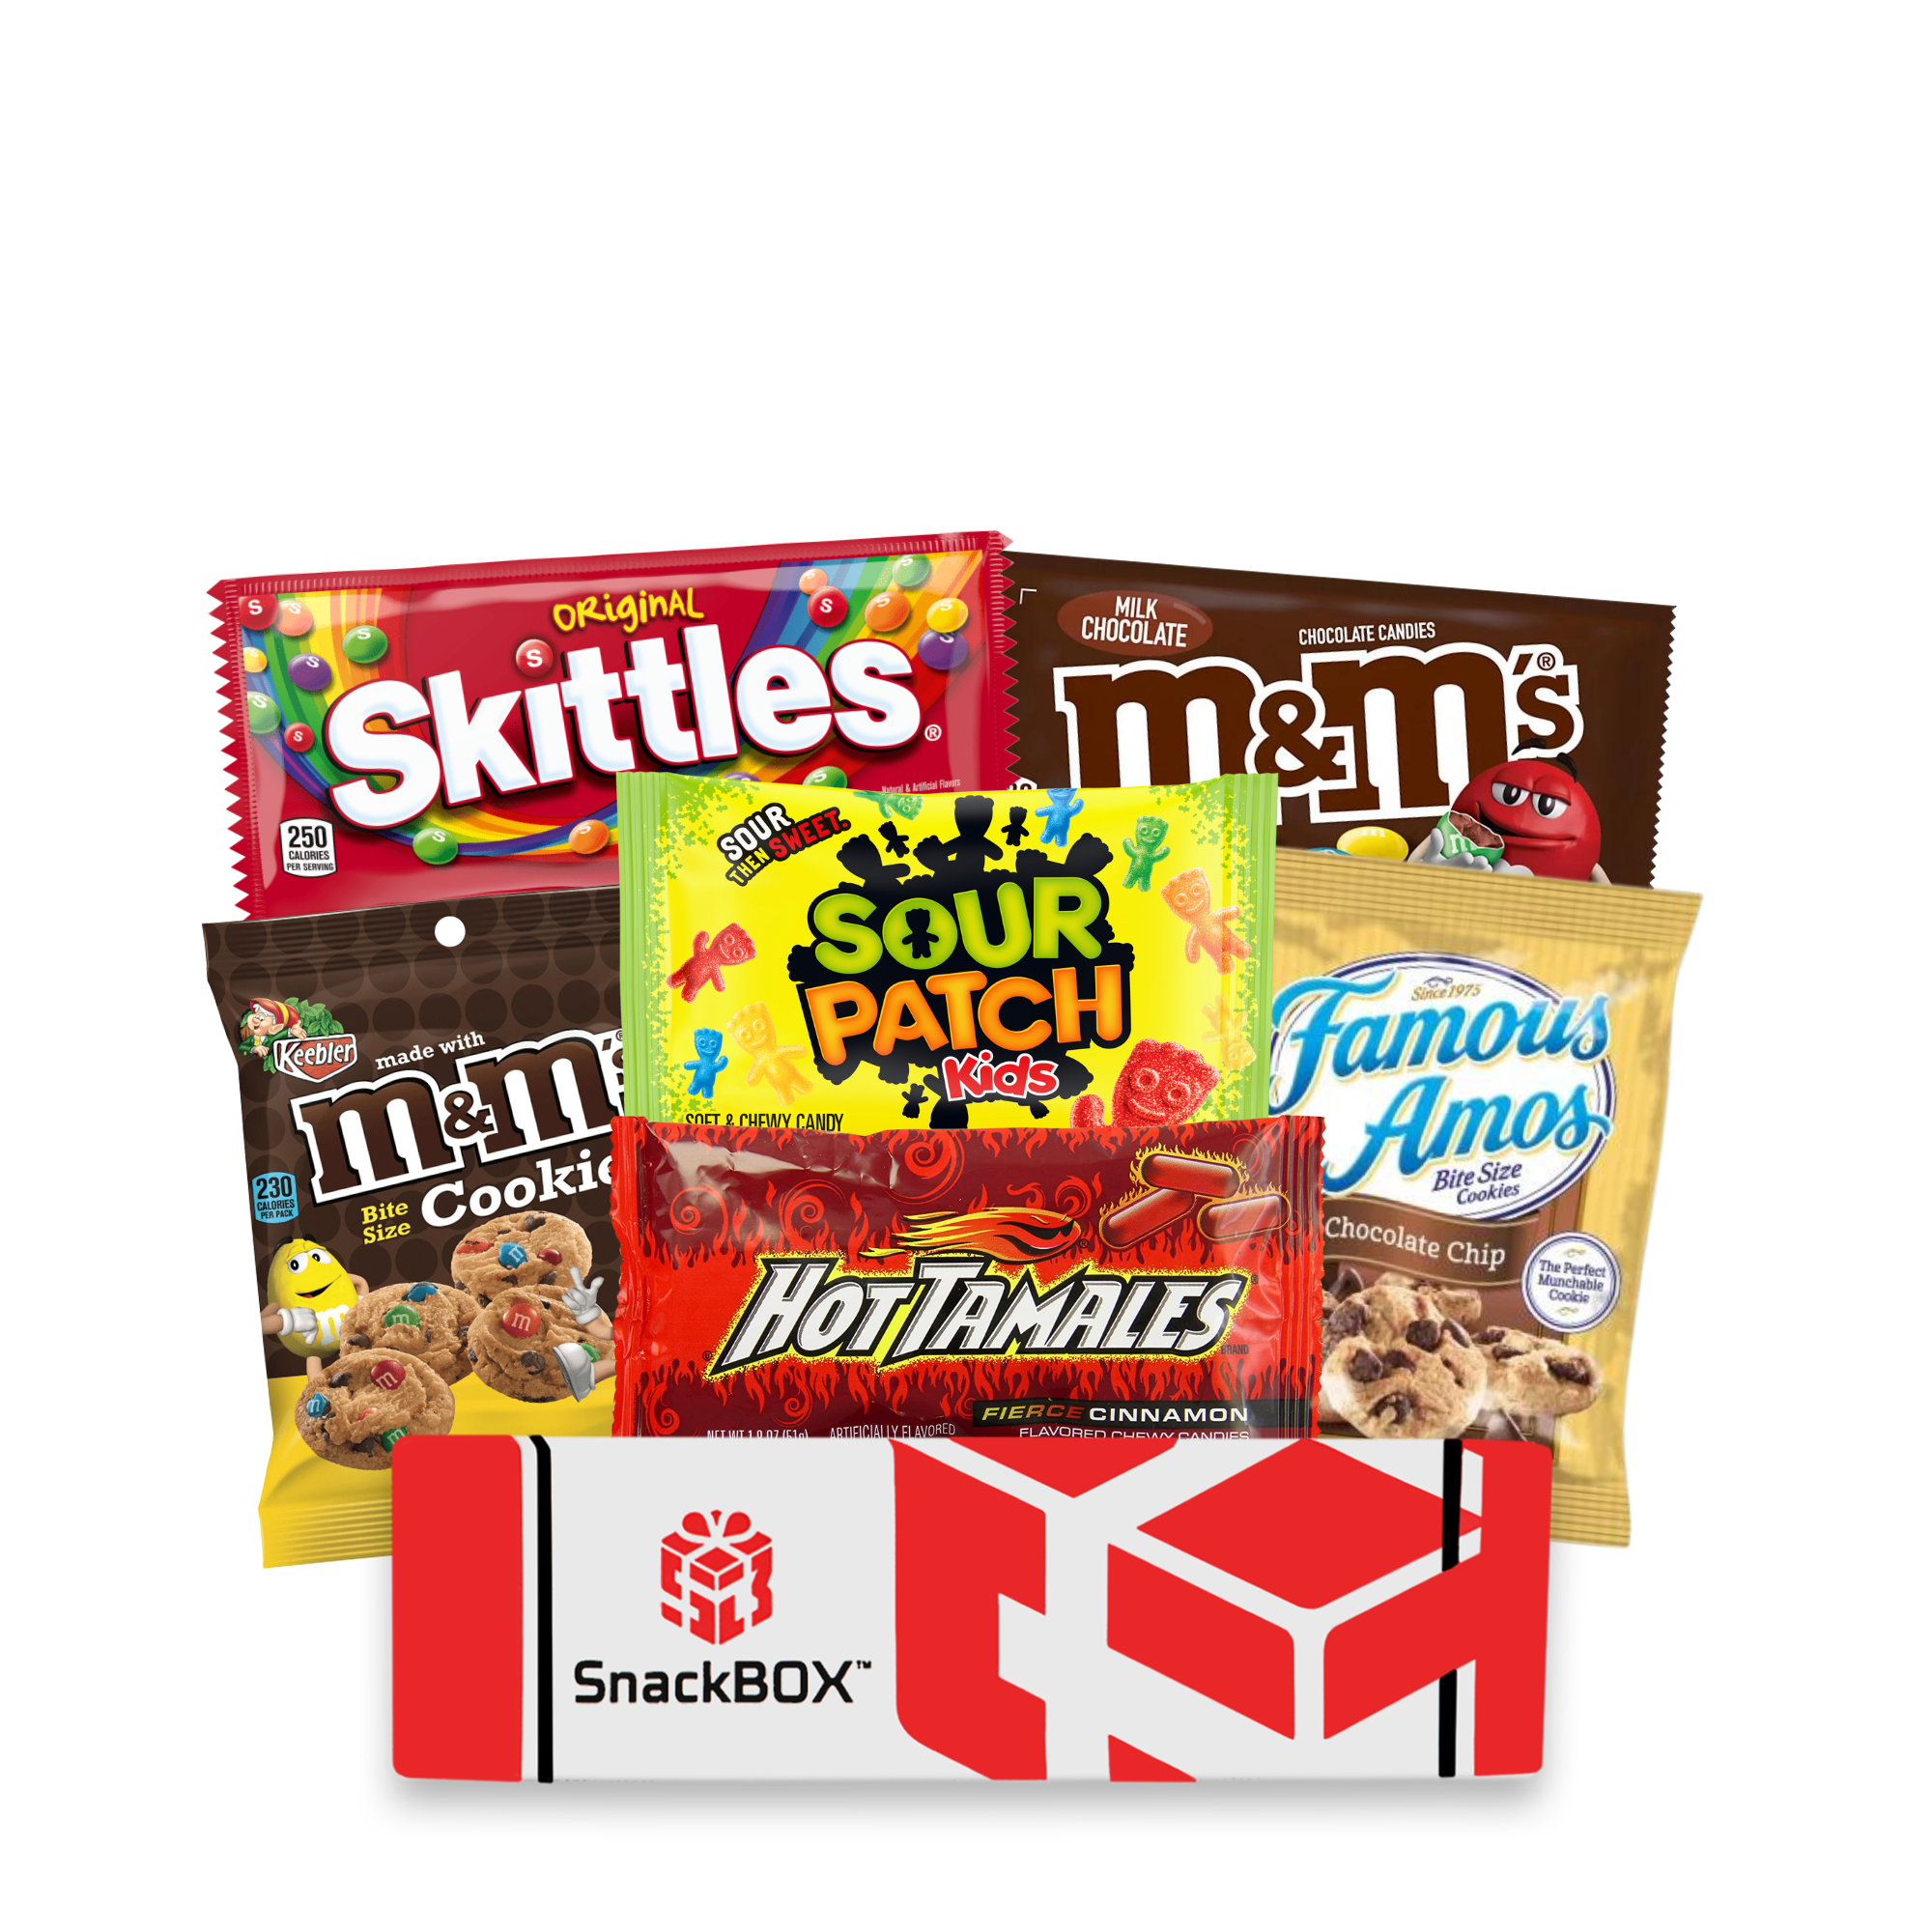 Fun Flavors Box Kids Candy Box 60 Count Variety Pack Gift, Sweet Treats,  Snack Care Package r